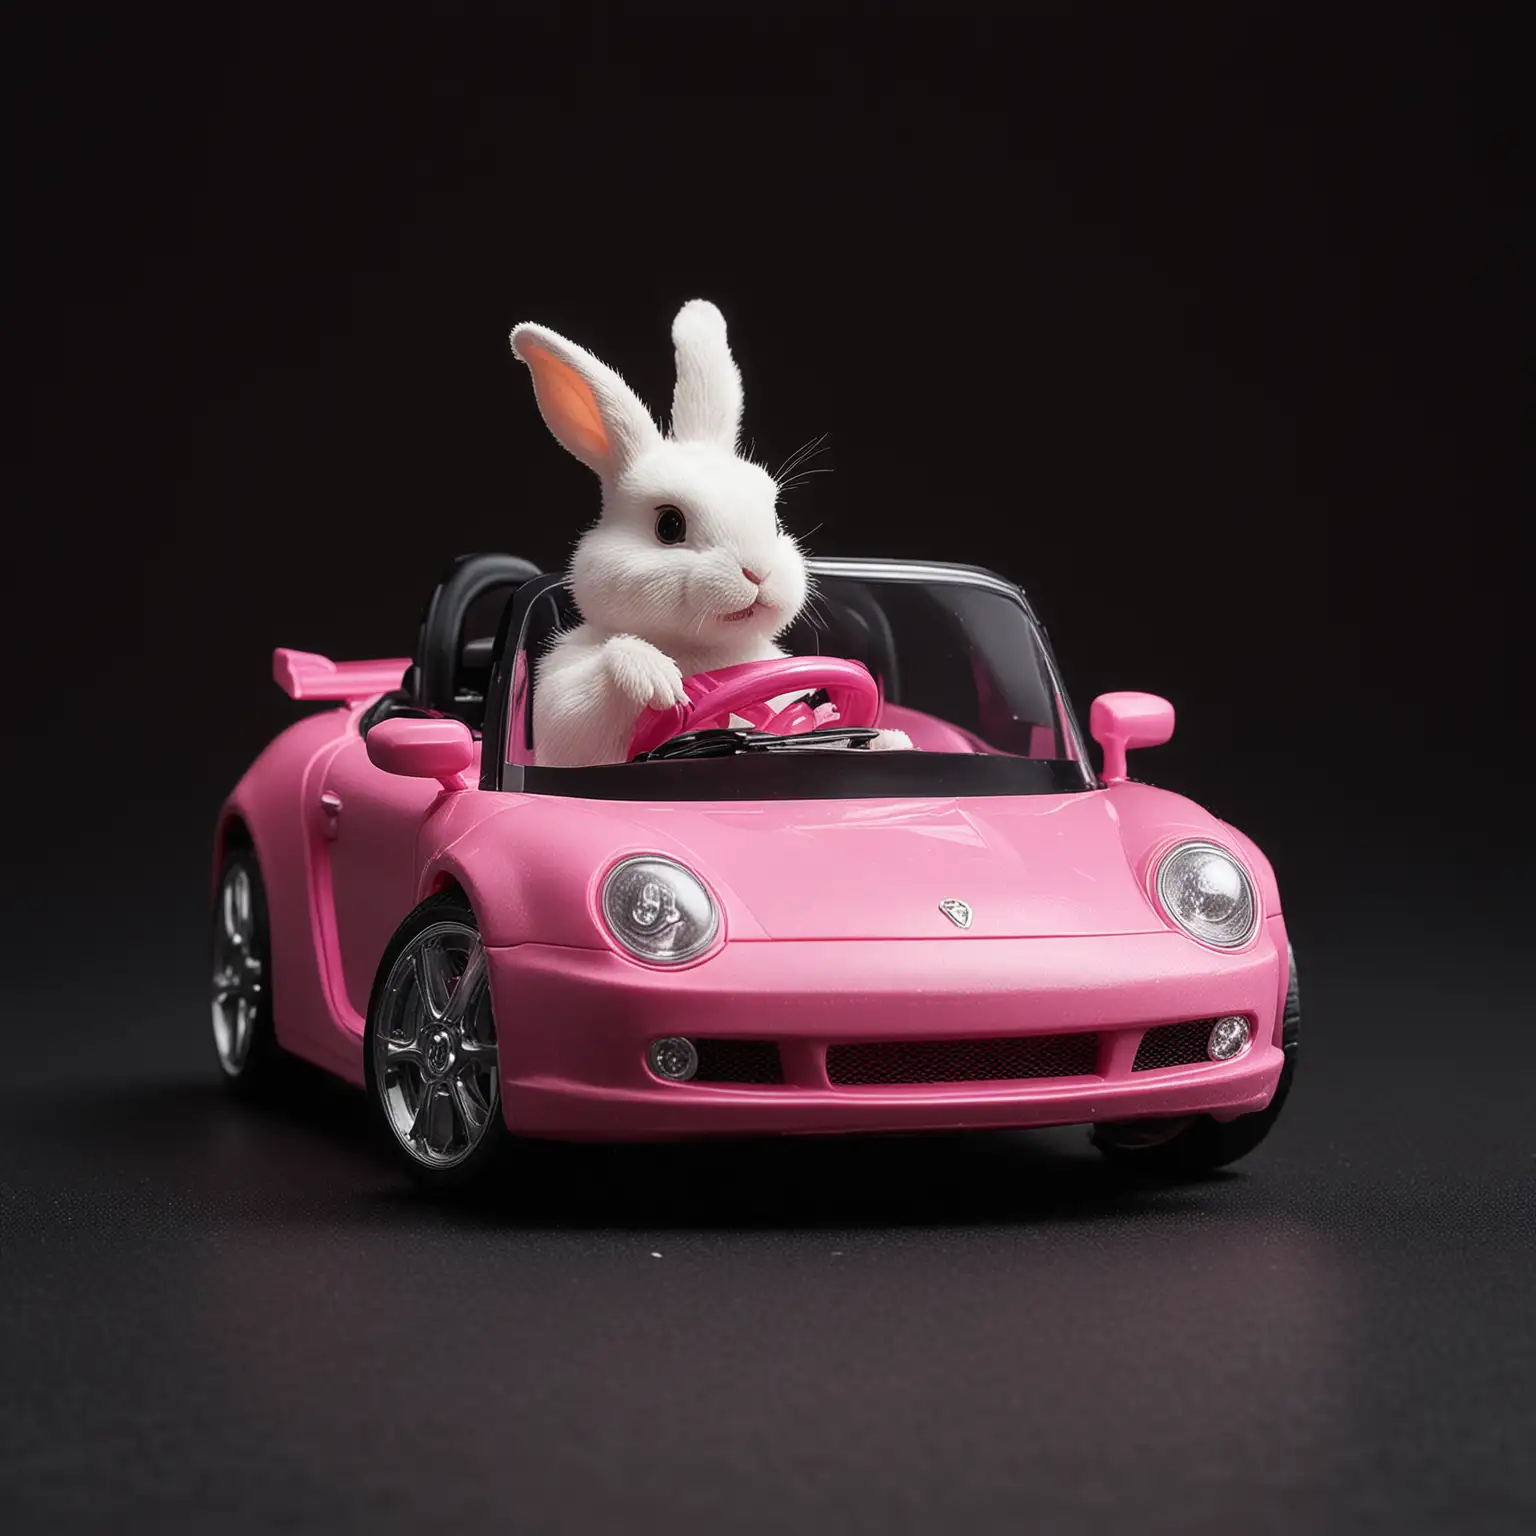 Cute realistic rabbit driving a pink toy car, Photograph, Real bunny, Pink barbie toy car, Black background,